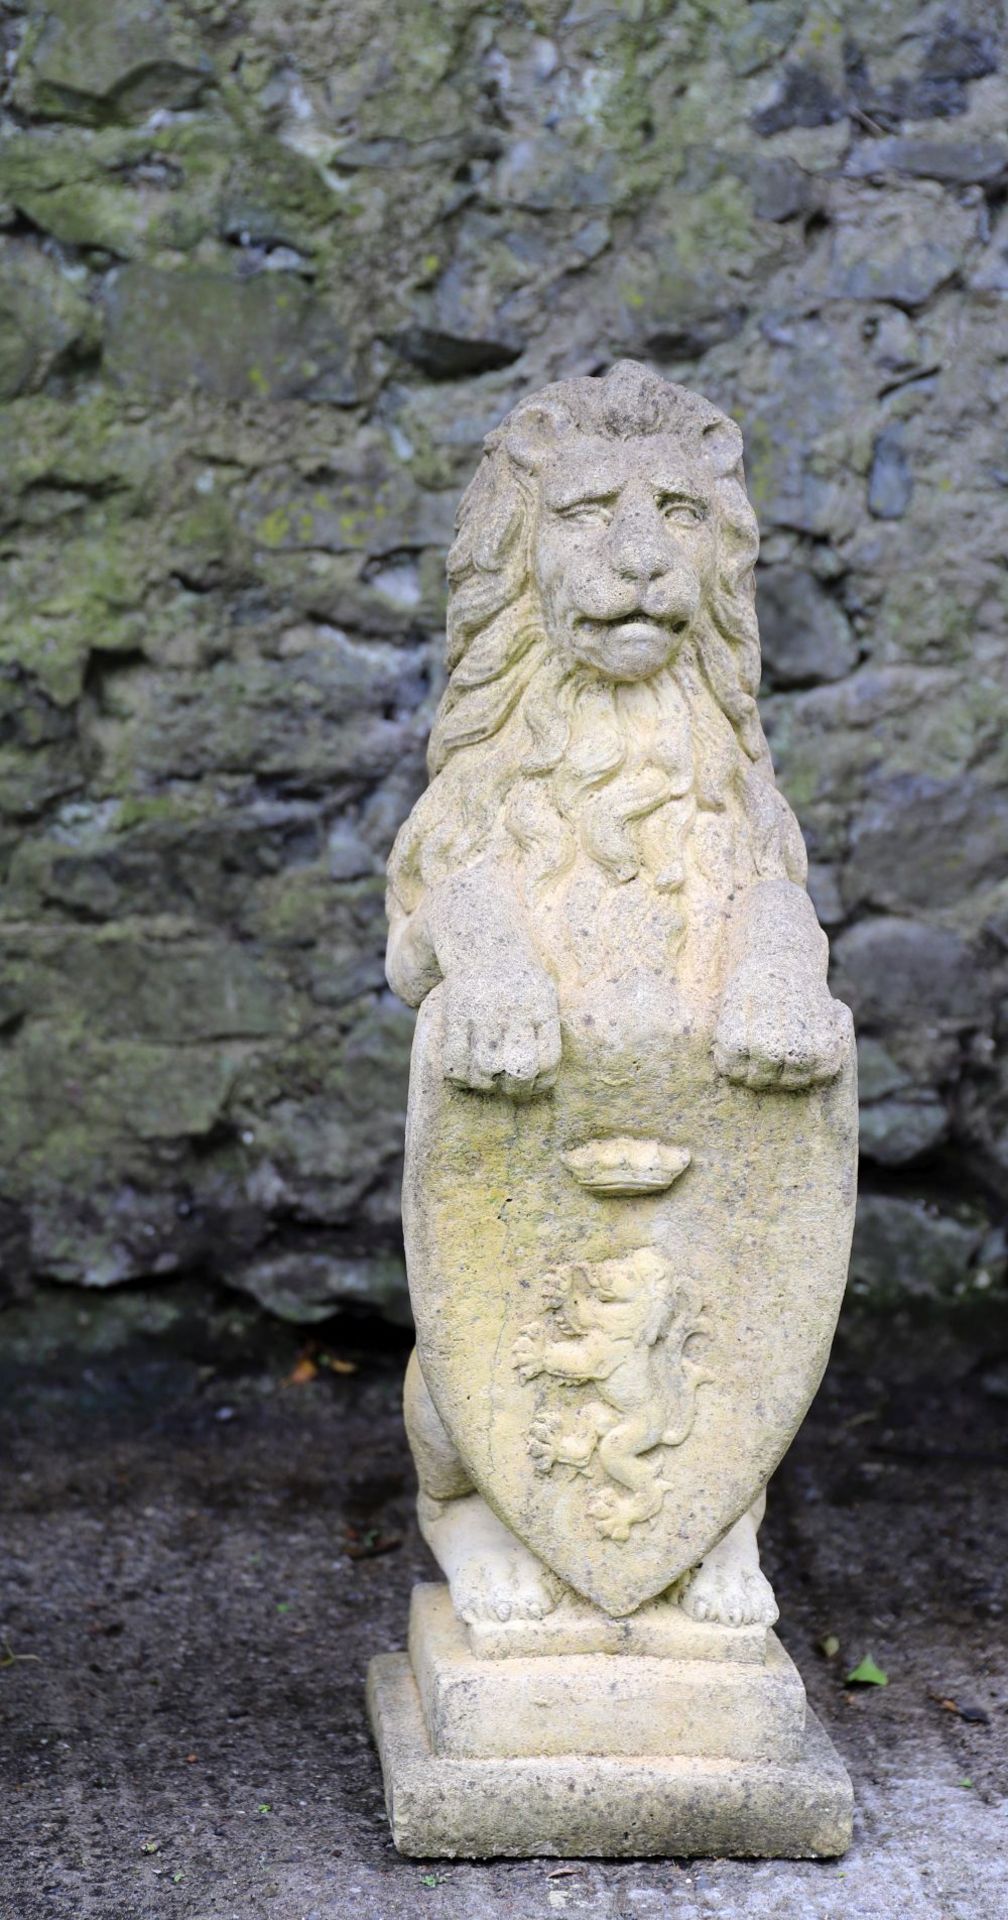 PAIR OF MOULDED STONE GARDEN SCULPTURES - Image 2 of 4